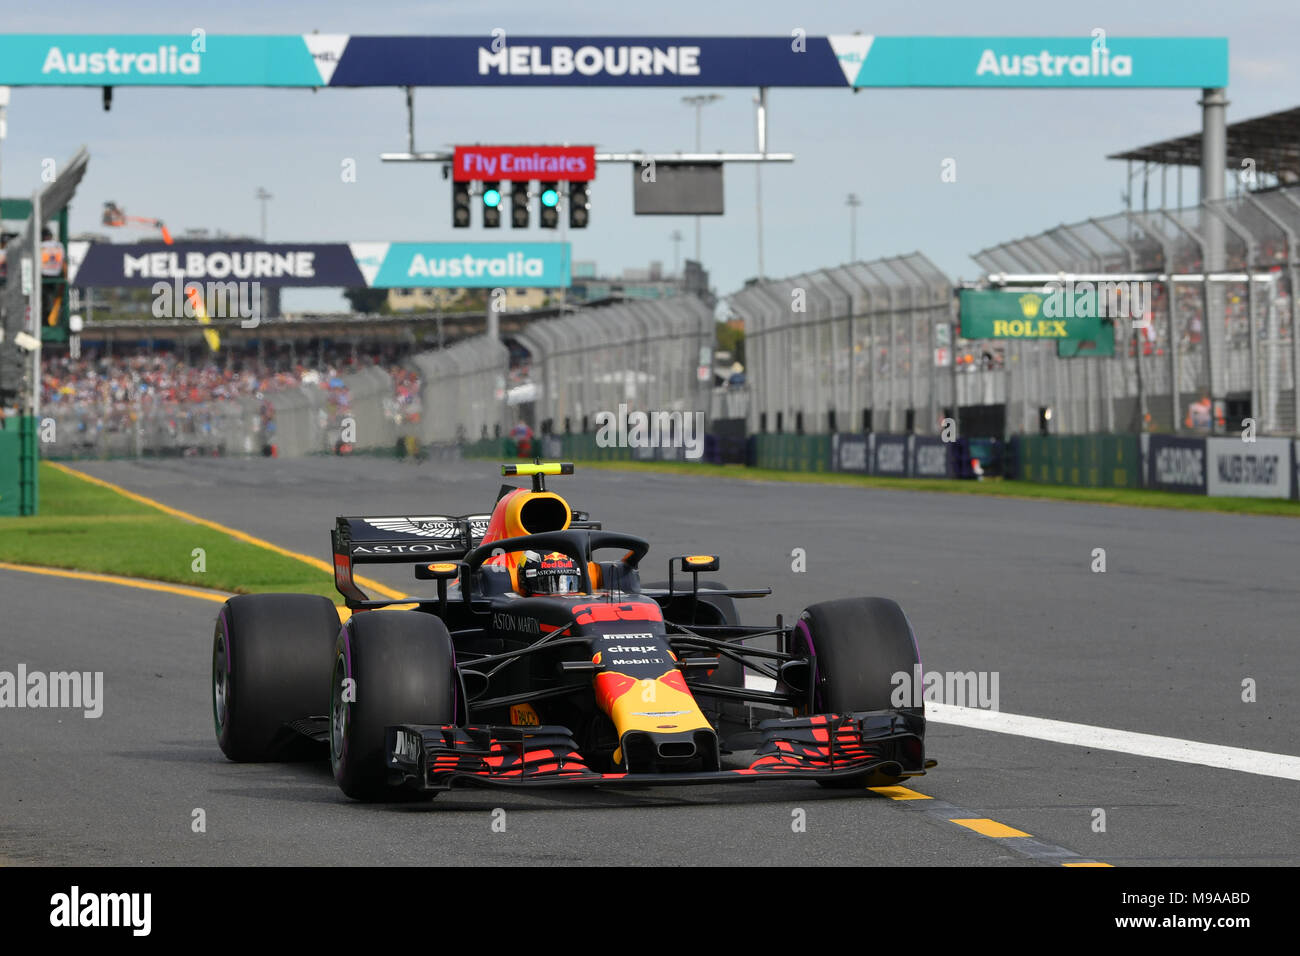 Albert Park, Melbourne, Australia. 24th Mar, 2018. Max Verstappen (NLD) #33 from the Aston Martin Red Bull Racing team leaves the pit for his qualifying lap at the 2018 Australian Formula One Grand Prix at Albert Park, Melbourne, Australia. Sydney Low/Cal Sport Media/Alamy Live News Stock Photo